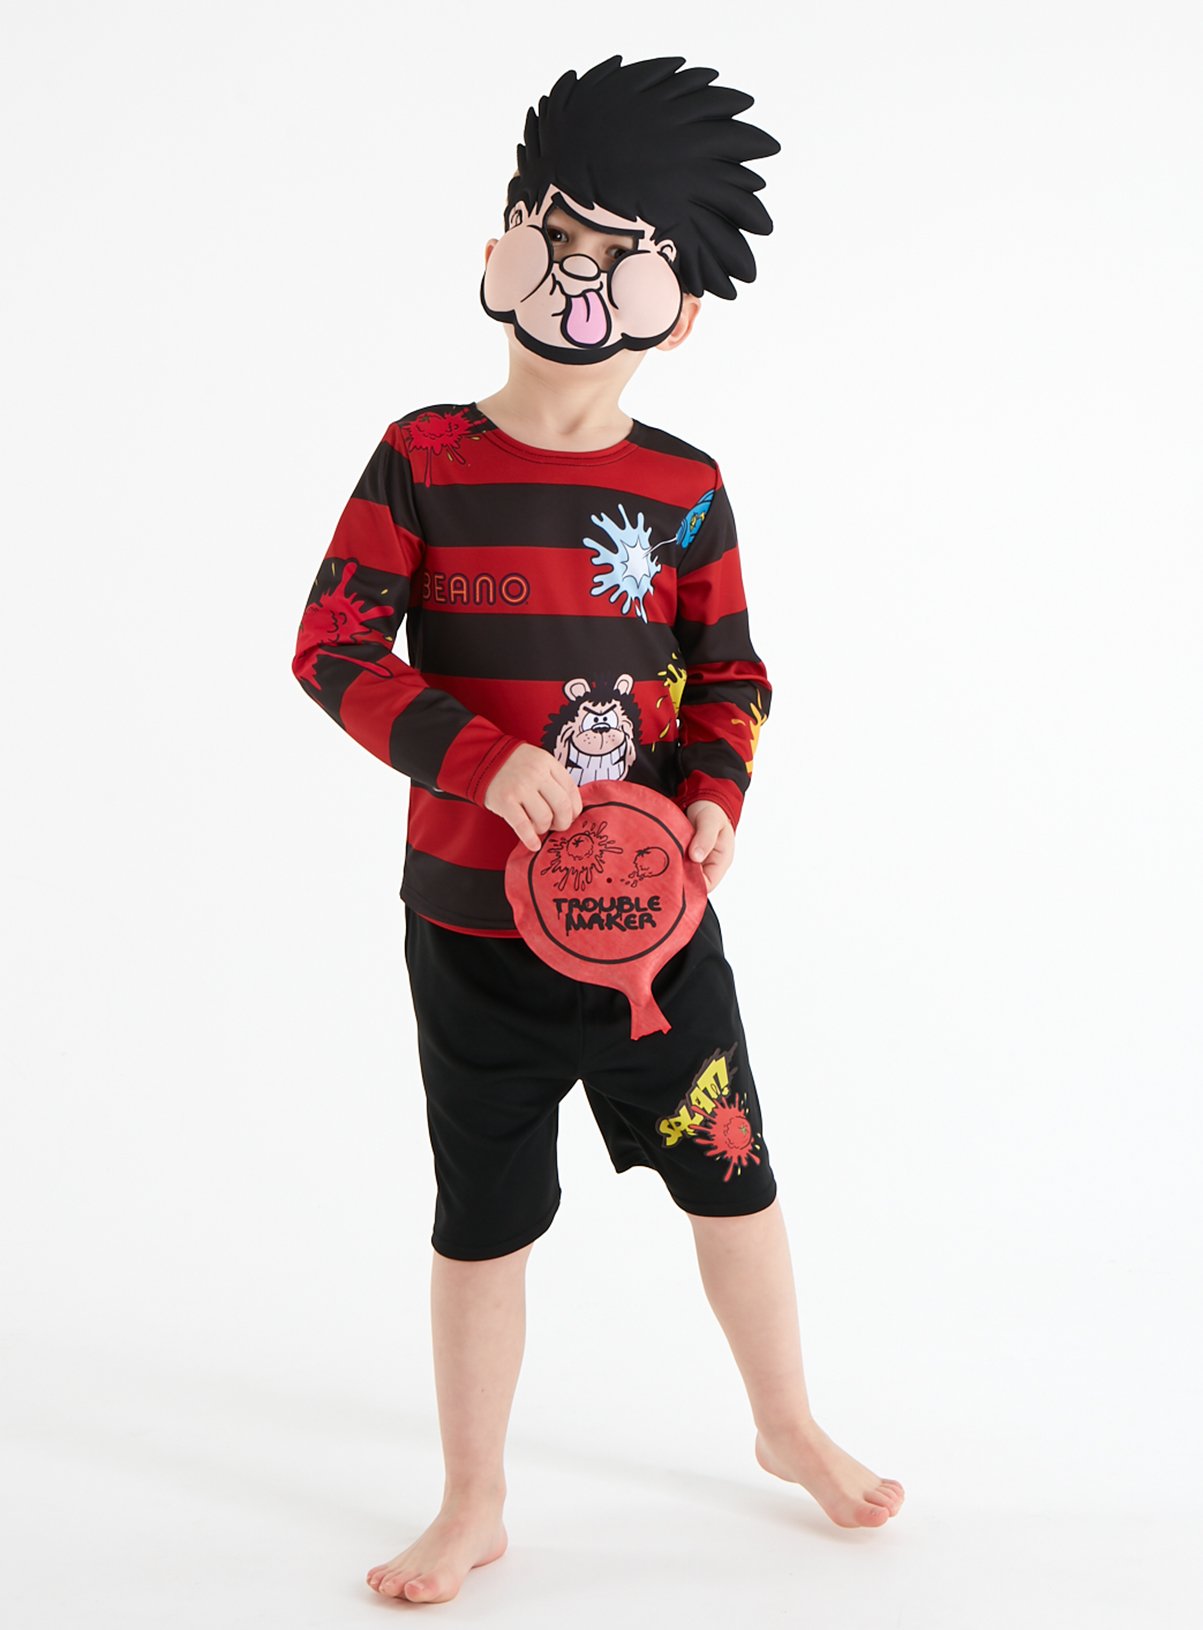 Beano Dennis The Menace Red Costume Set Review